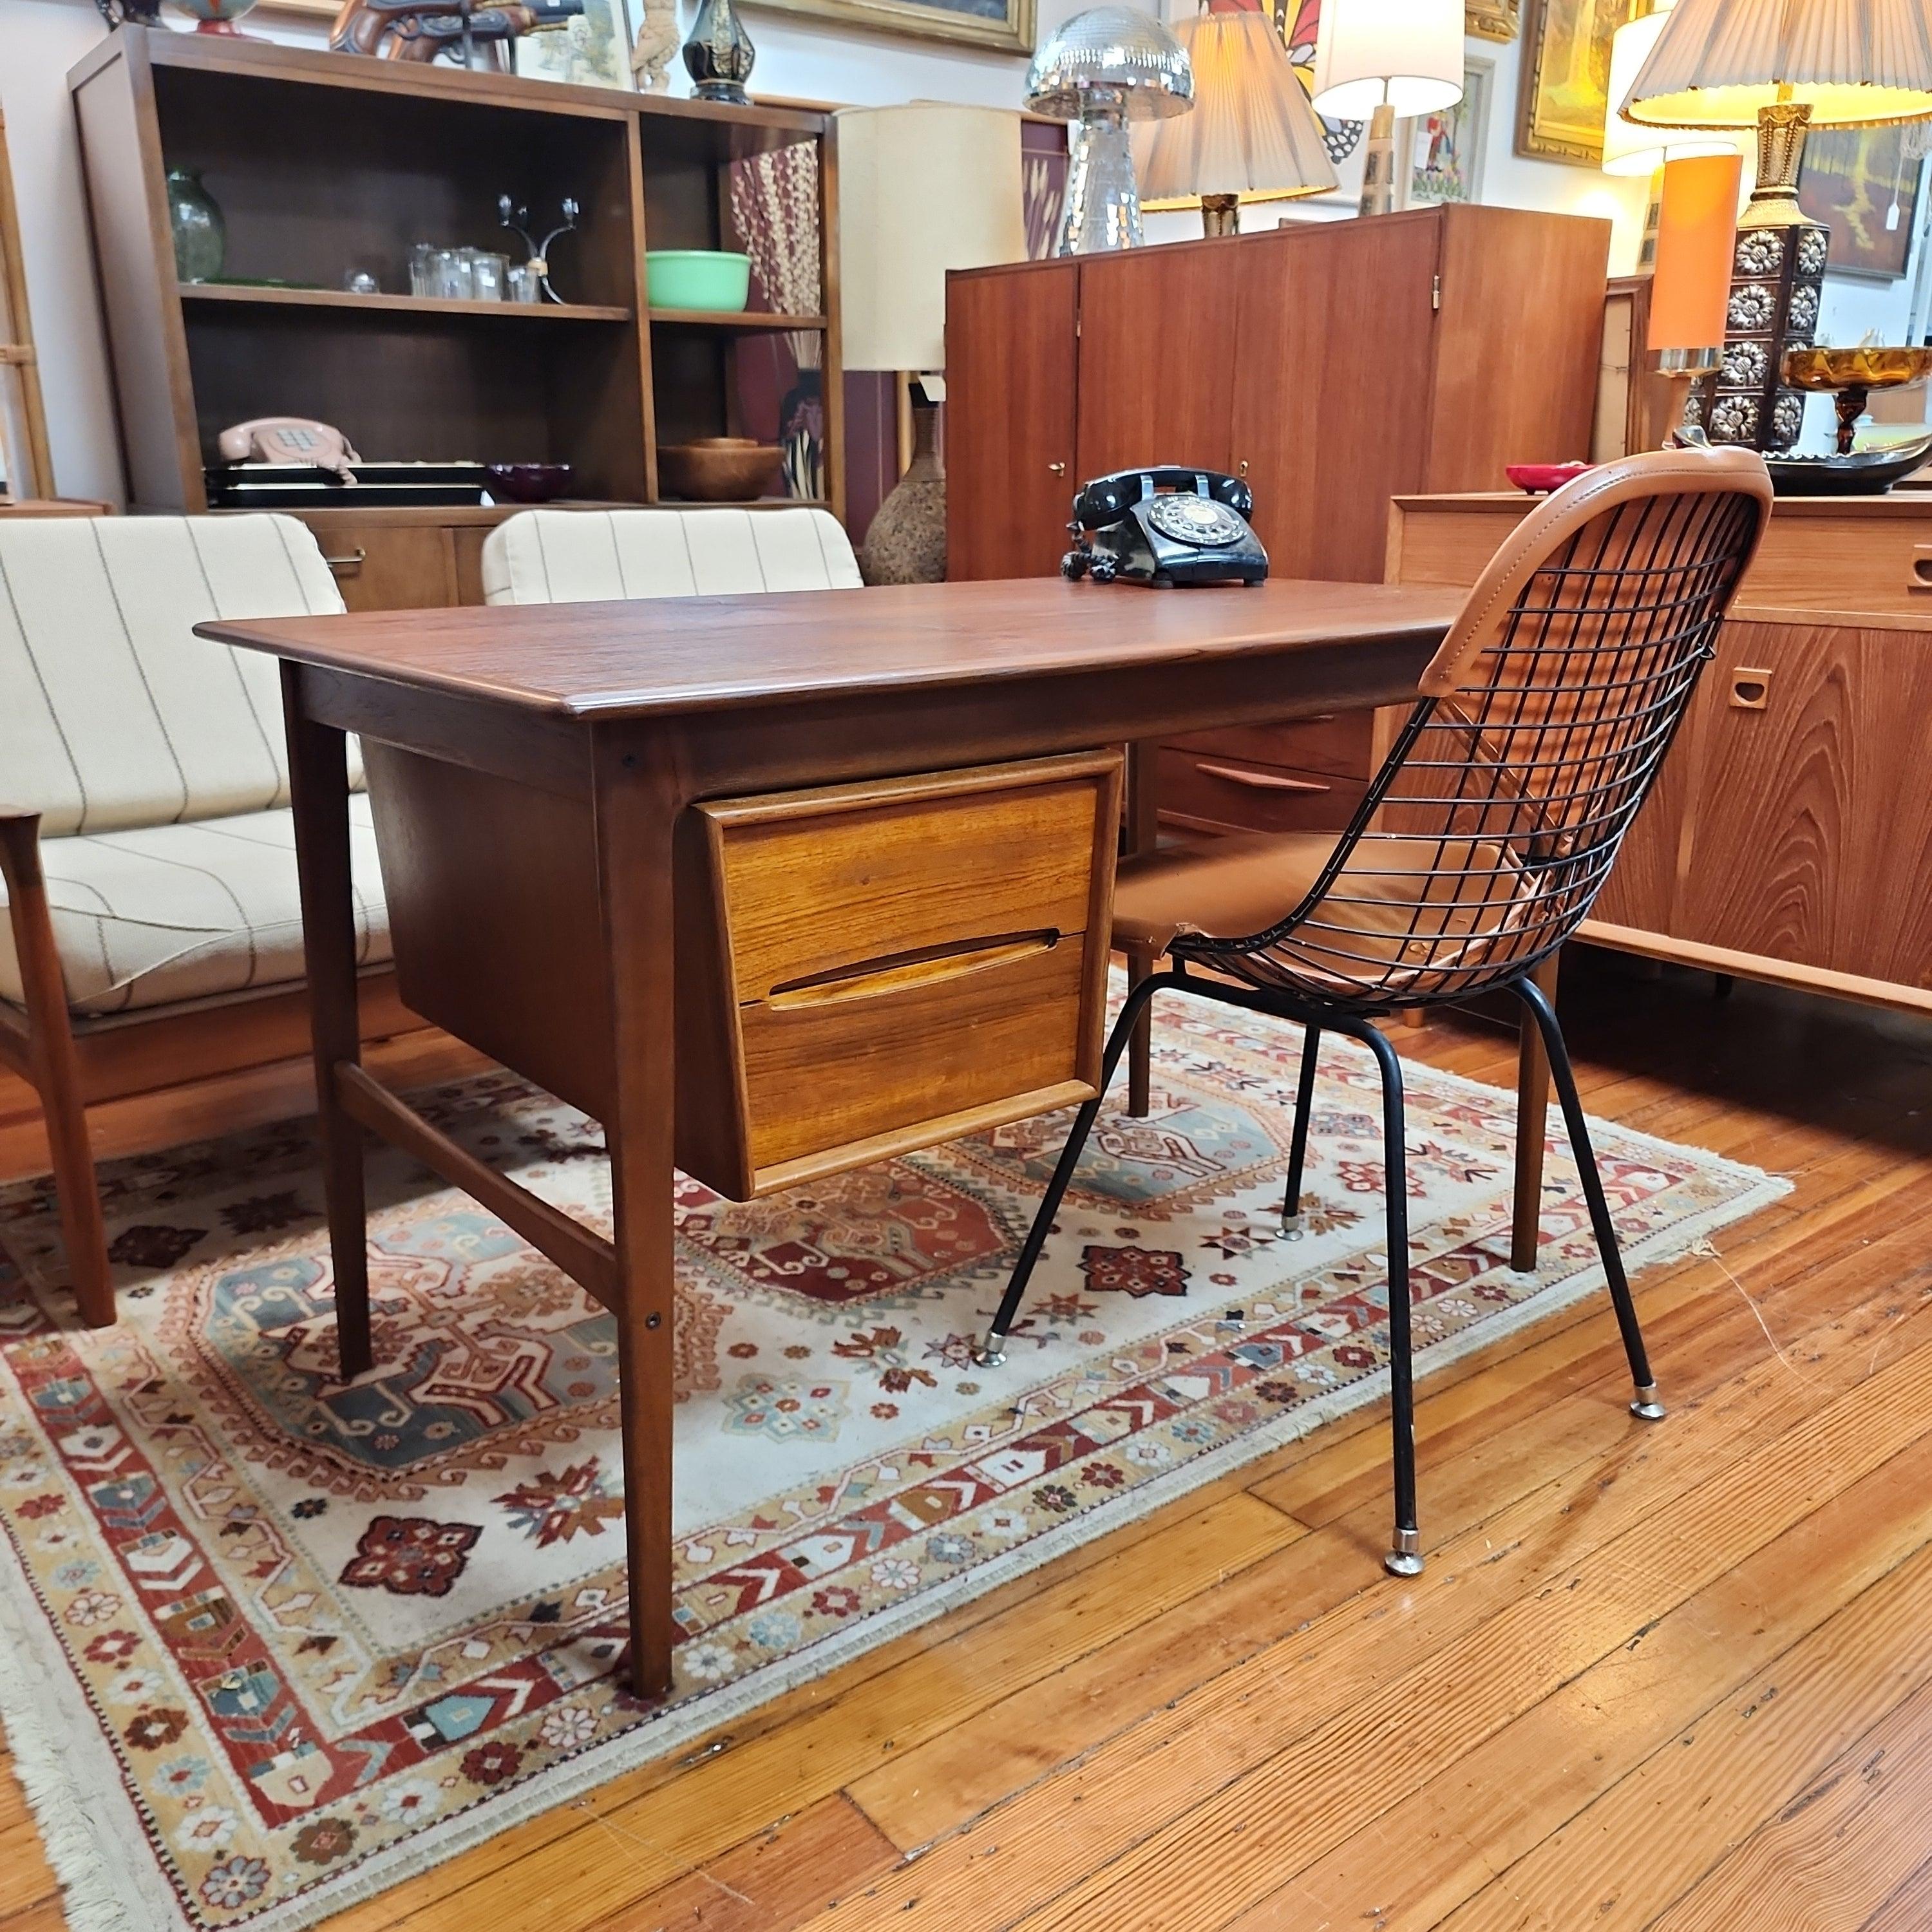 This unusual Danish teak writing desk has a special design. The drawer stack can slide from left to right to accommodate different spaces and left-handed individuals. 
The deep red tone of the teak dates this piece to the 1950s with its beautiful